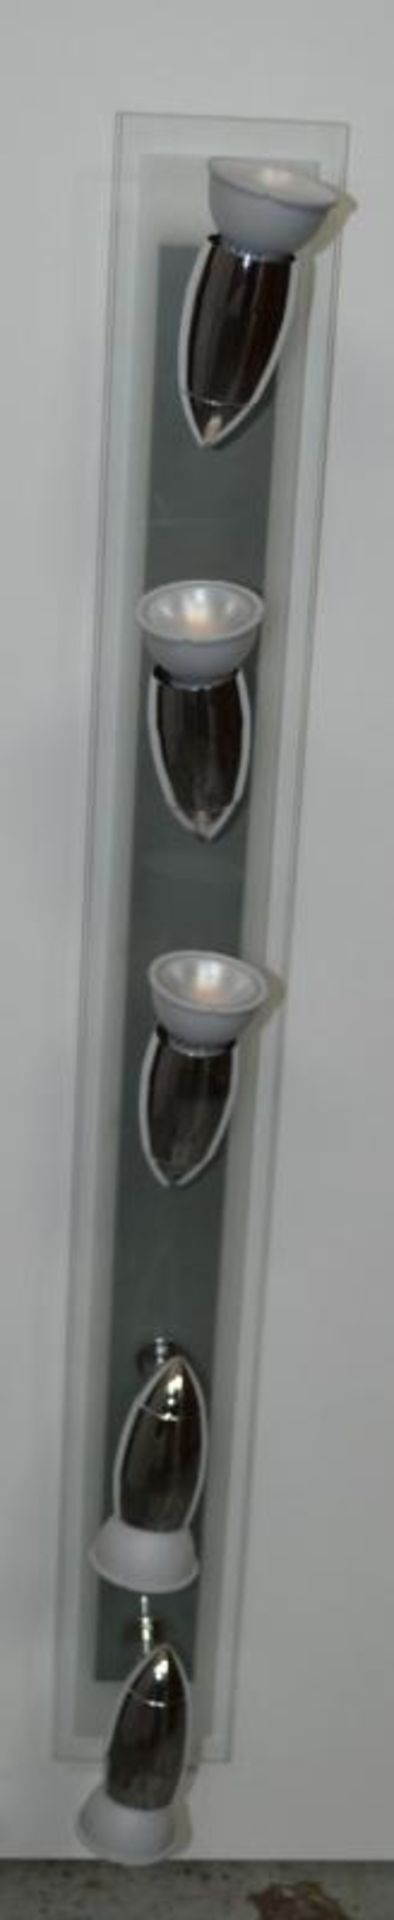 1 x Ex Display Saturn 5 Light Ceiling Spotlight Polished Chrome - CL364 - Ref: ERP2-12690 - Location - Image 2 of 2